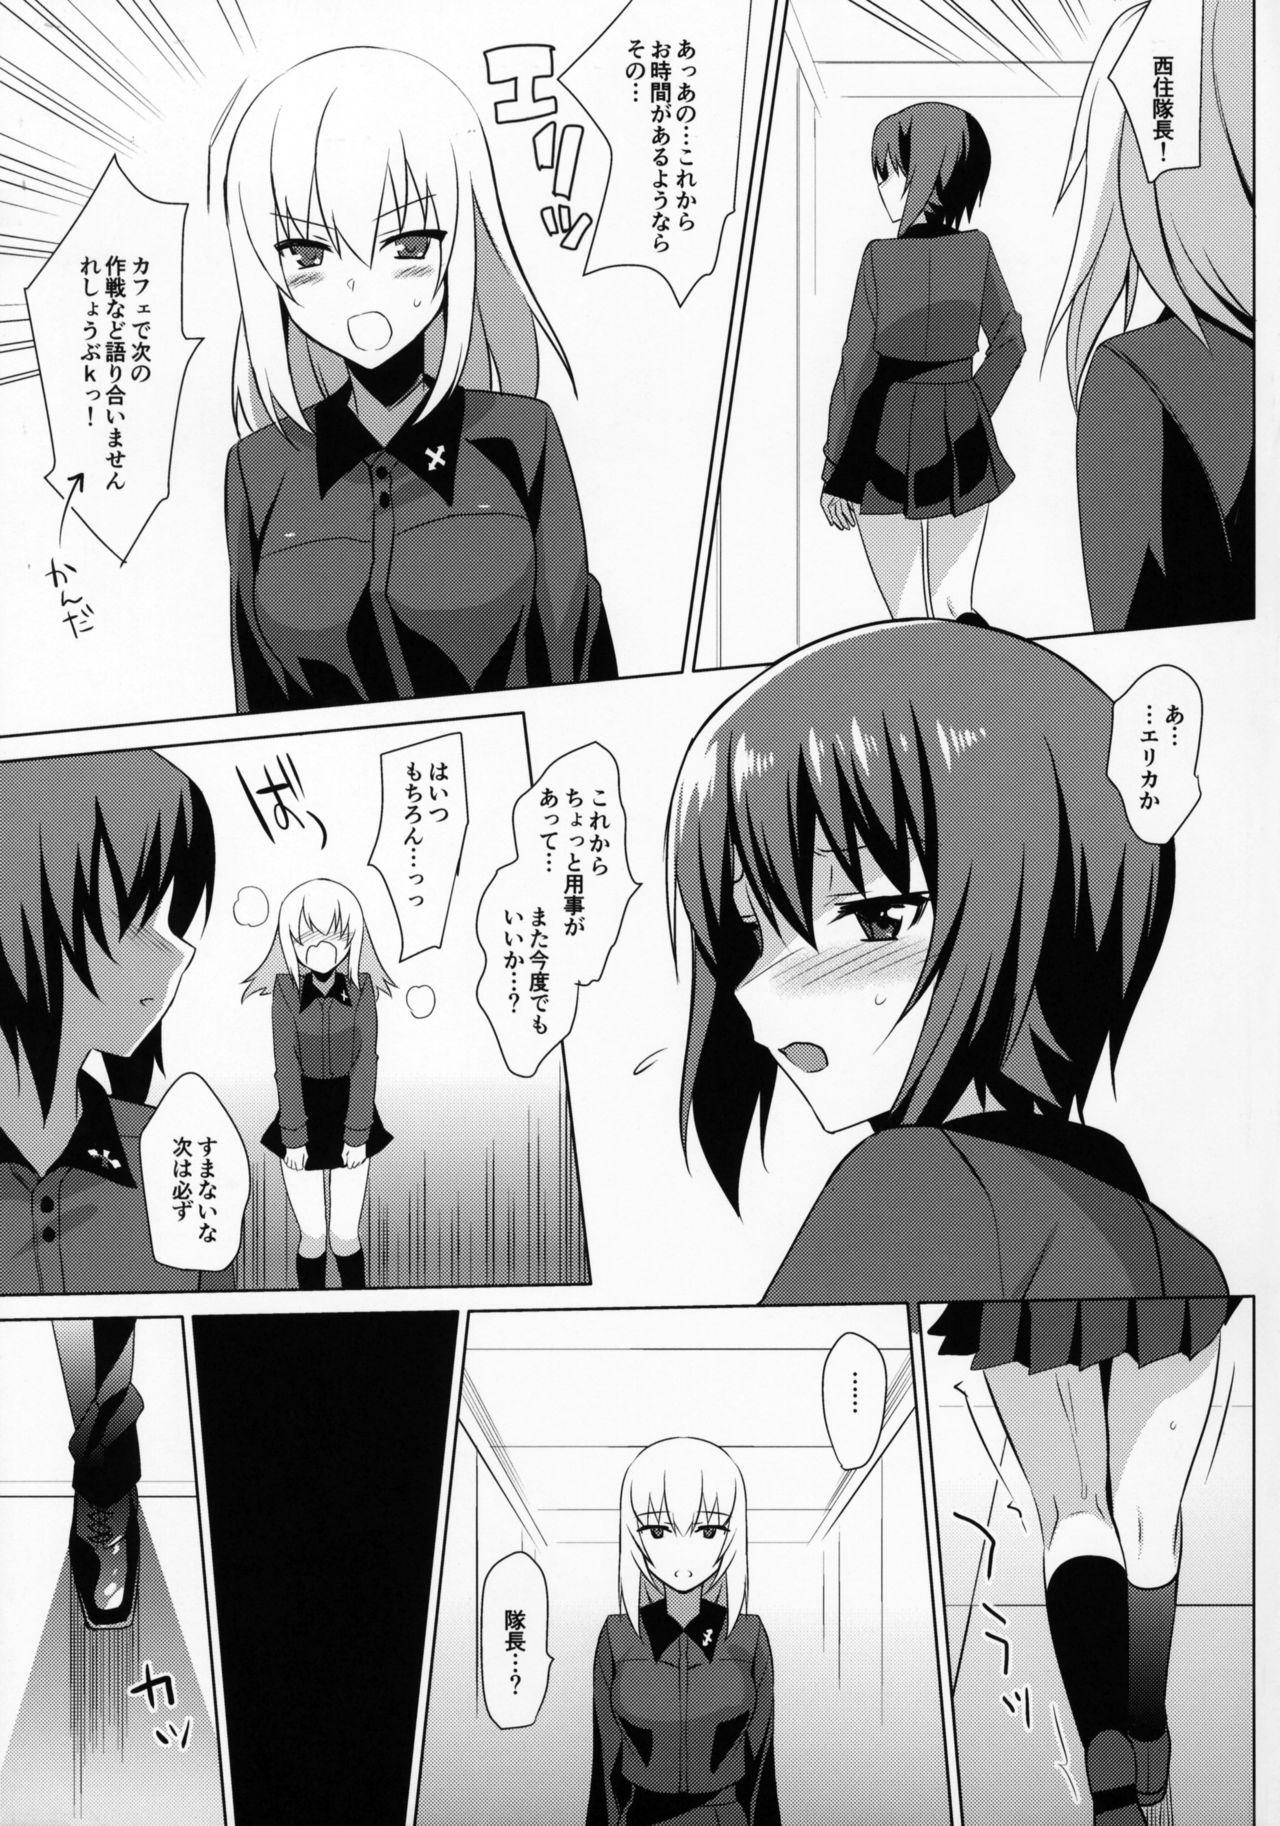 Small Tits LET ME DIE - Girls und panzer Lesbians - Page 4